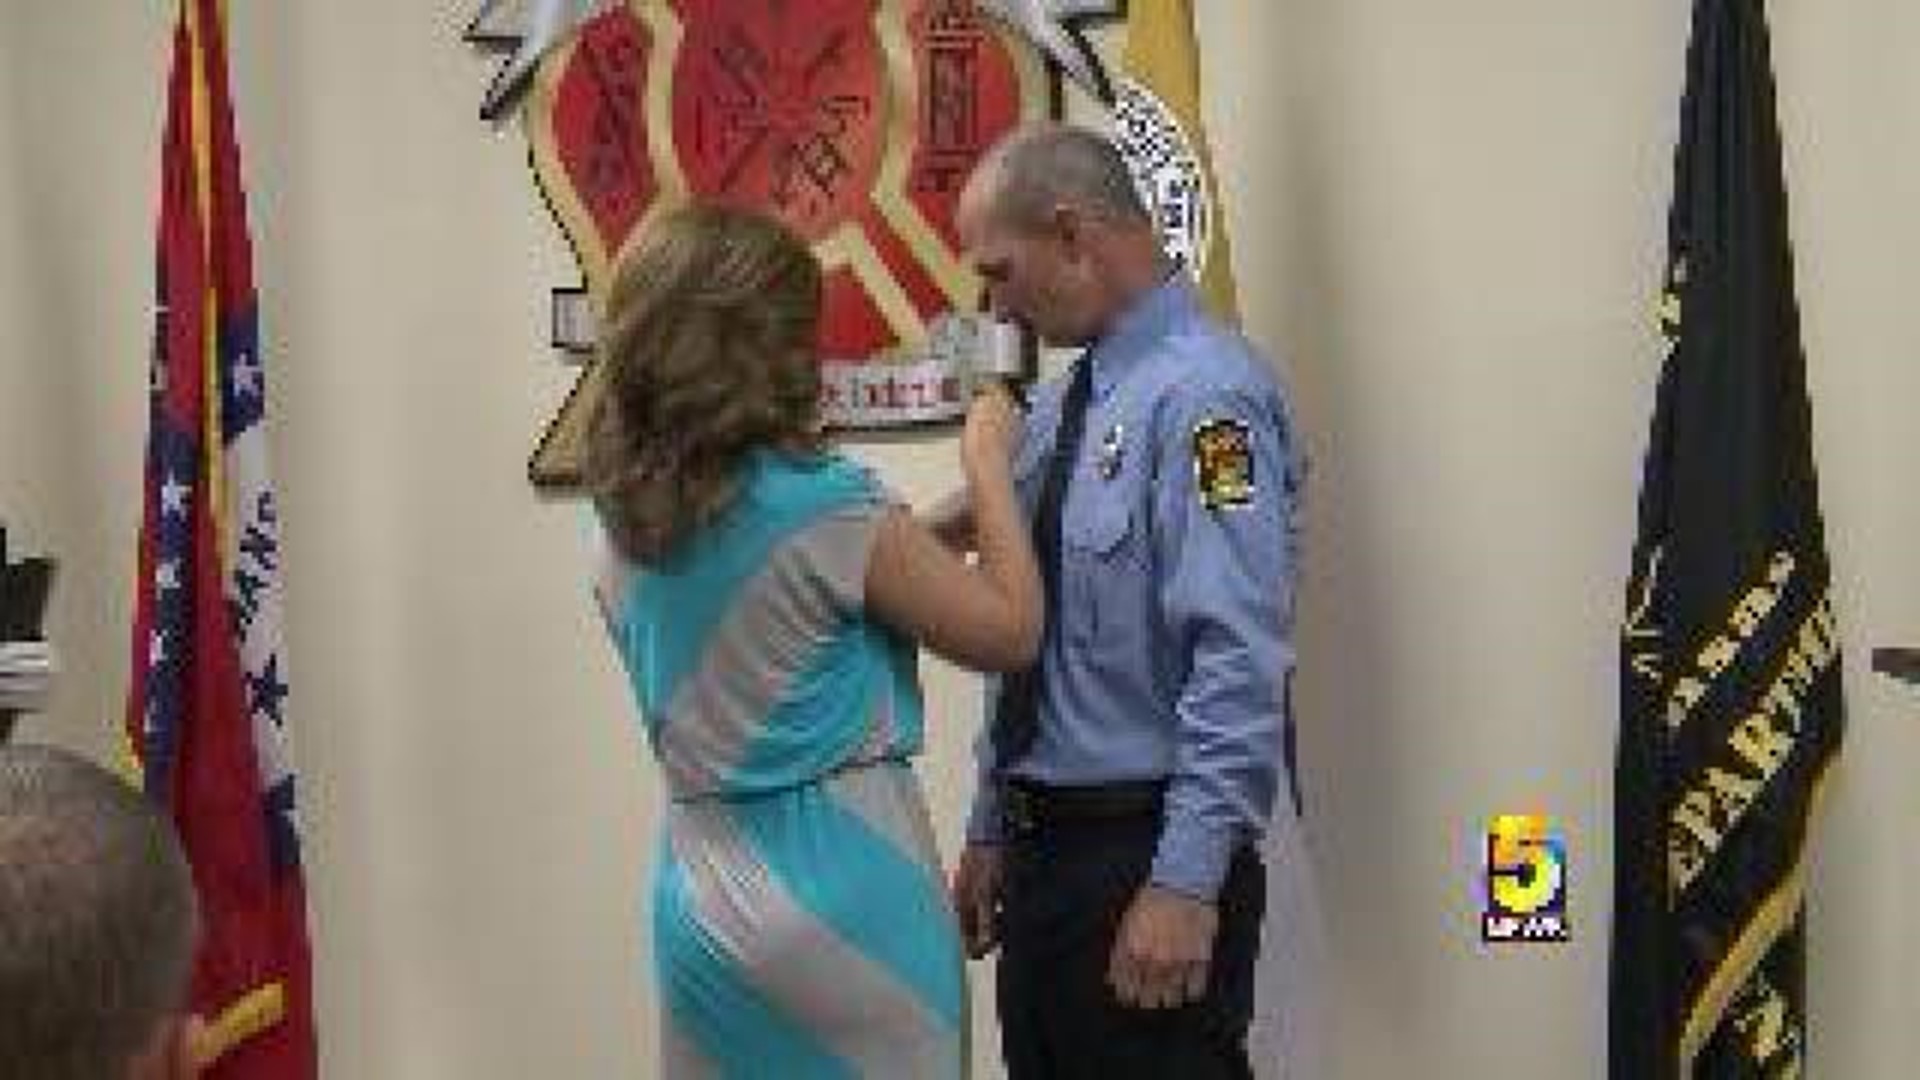 Firefighter Honored for Rescuing Child